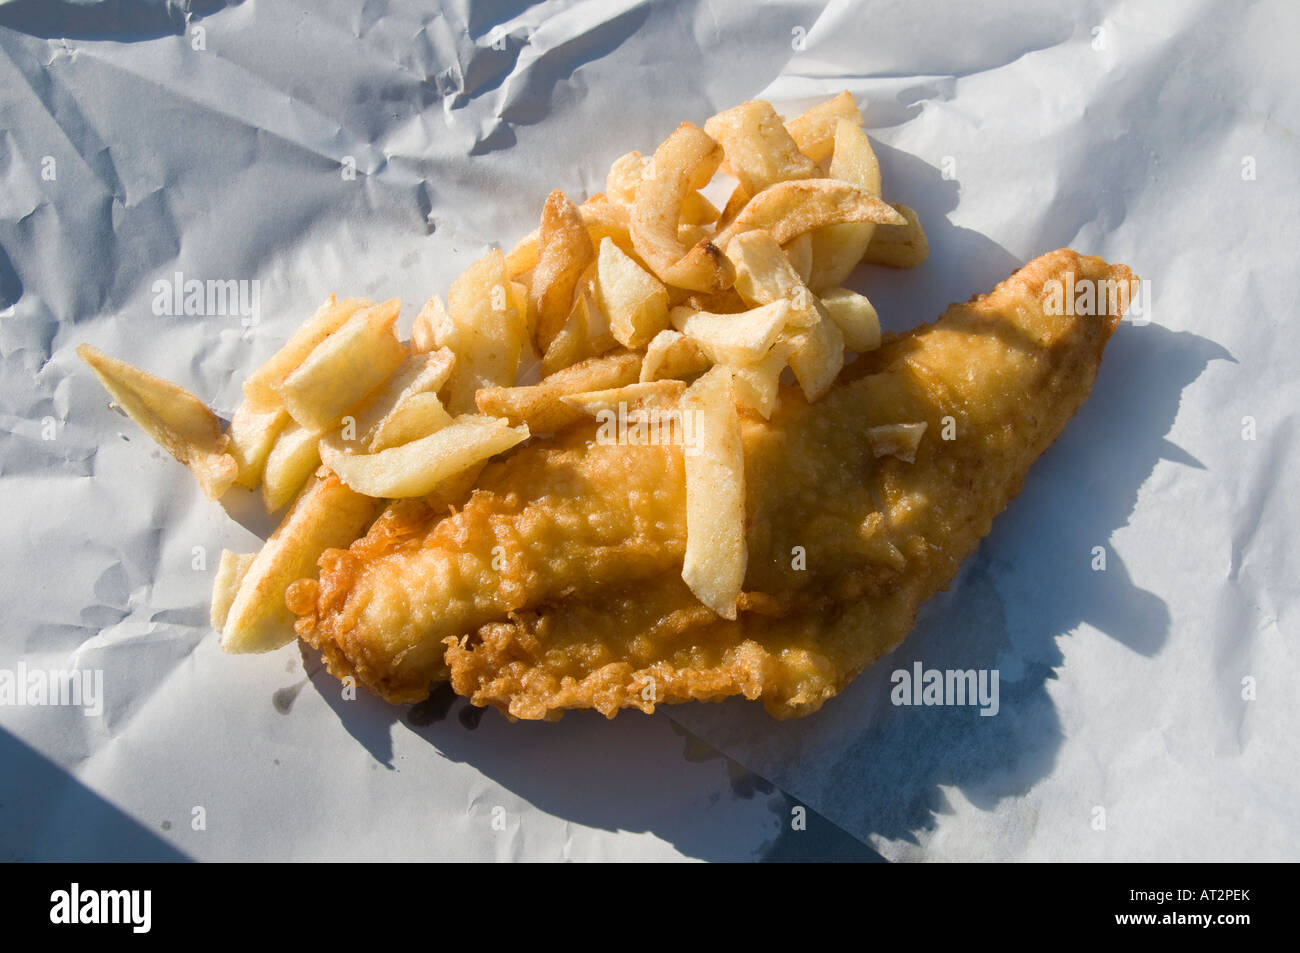 Fish and chips - cod in batter - fish supper, traditional British English fast food take-away meal, UK Stock Photo